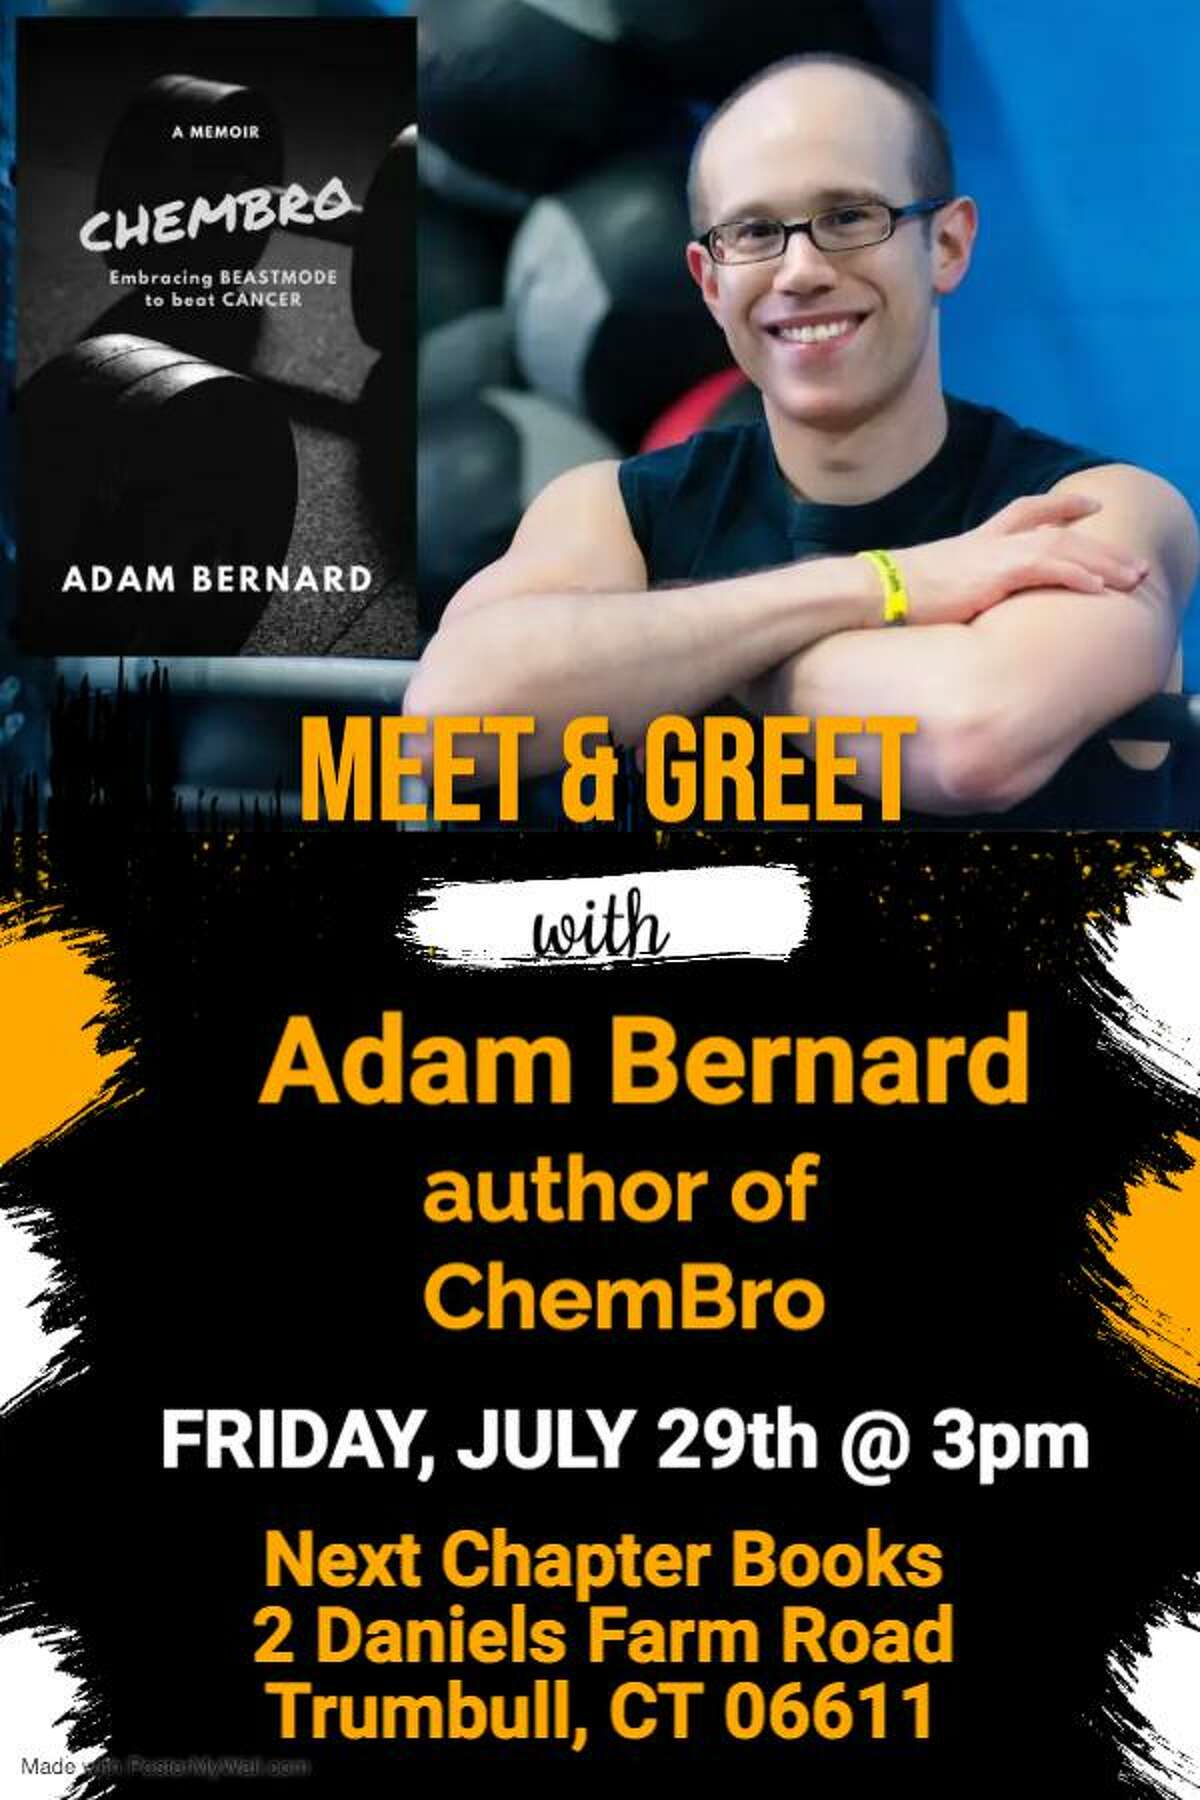 There will be a meet and greet event with Fairfield author Adam Bernard at the Next Chapter Books bookstore in Trumbull at 3 p.m. July 29. Bernard’s memoir that is titled: “ChemBro: Embracing Beastmode to Beat Cancer” has been inspiring readers since its release Aug. 30, 2022, according to amazon.com, with a flyer for the event shown.